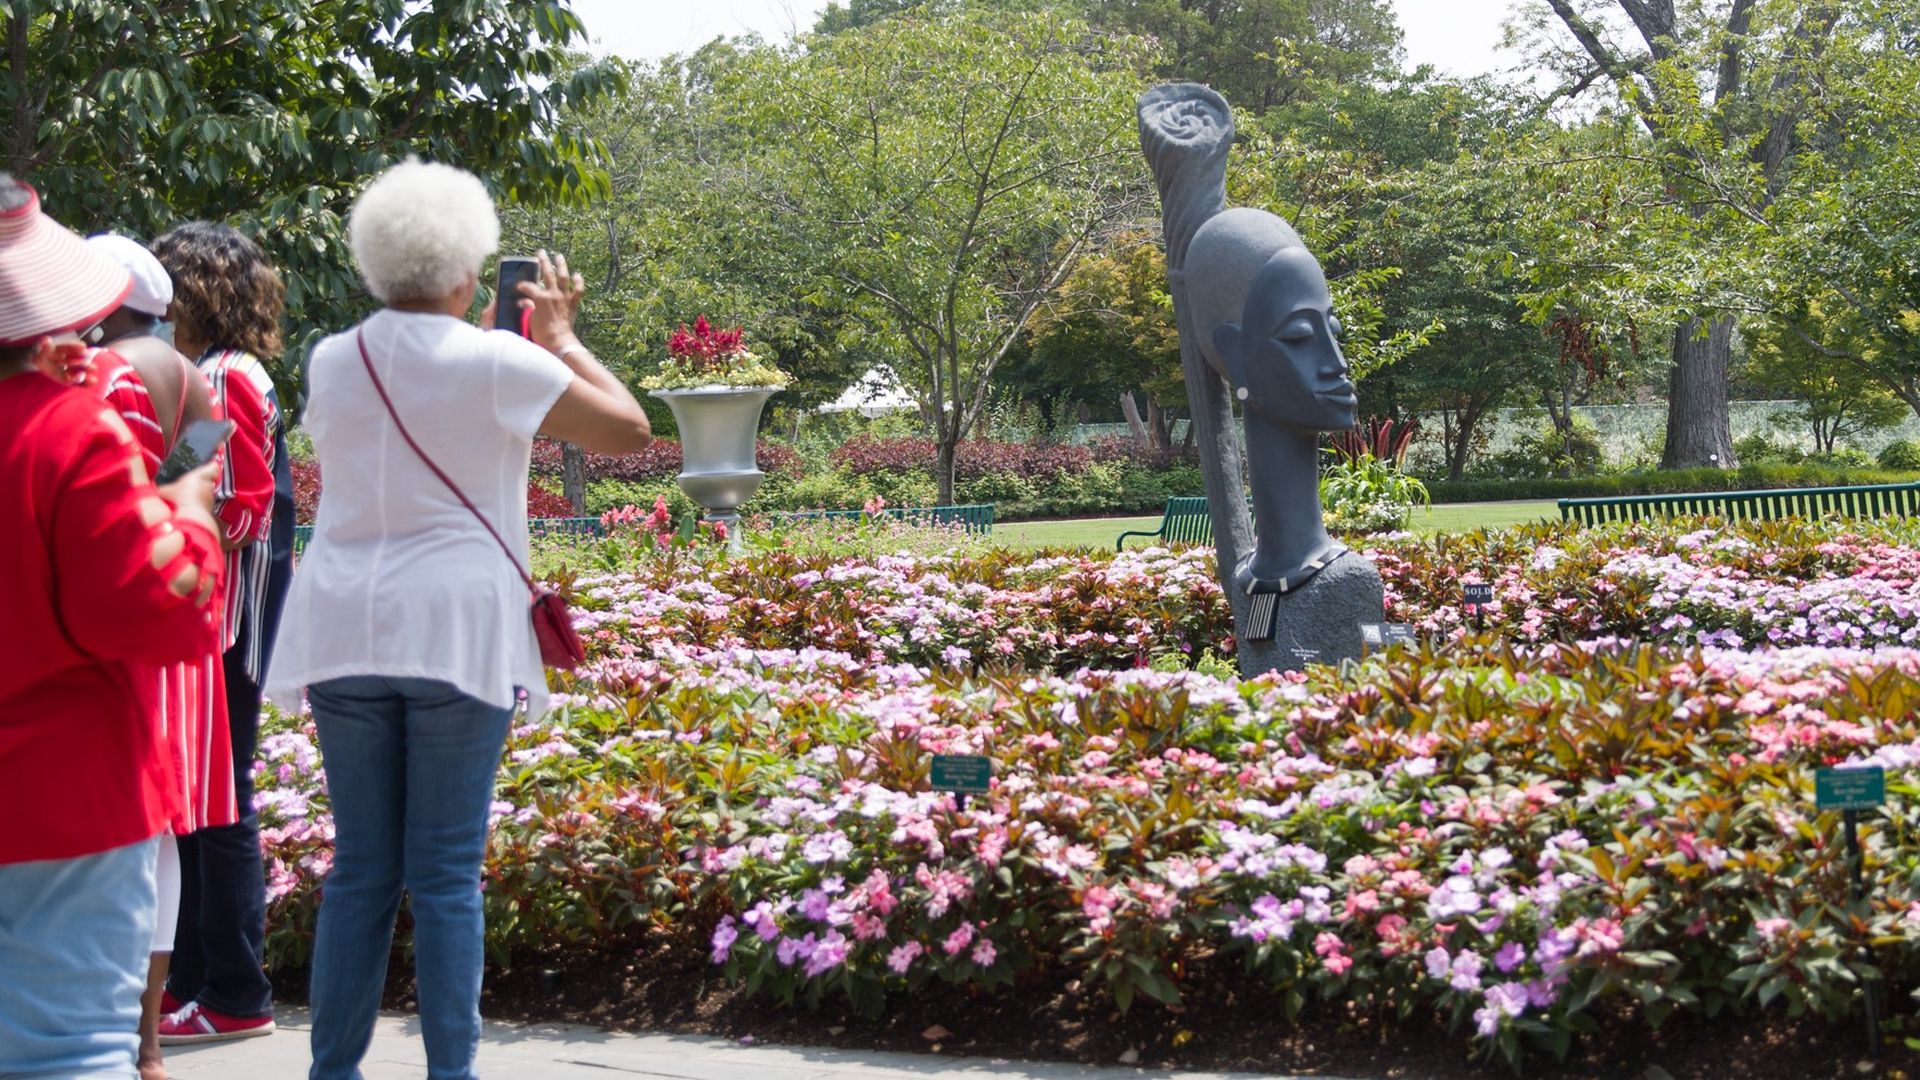 Ladies taking photos of a sculpture and flowers